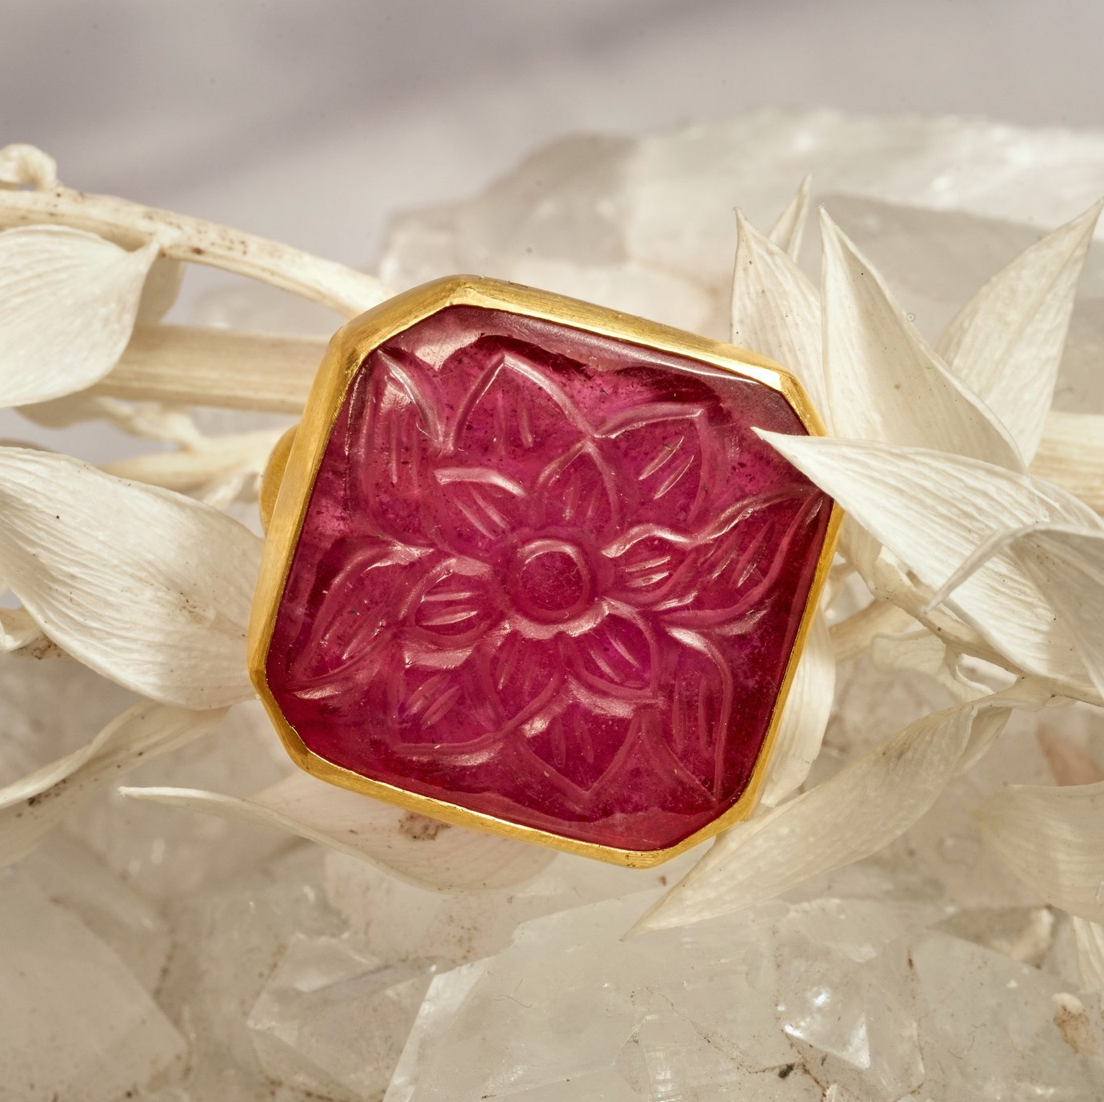 Hetre Alresford Hampshire Jewellery Boutique Sophie Theakston Carved Ruby Ring (Square)  